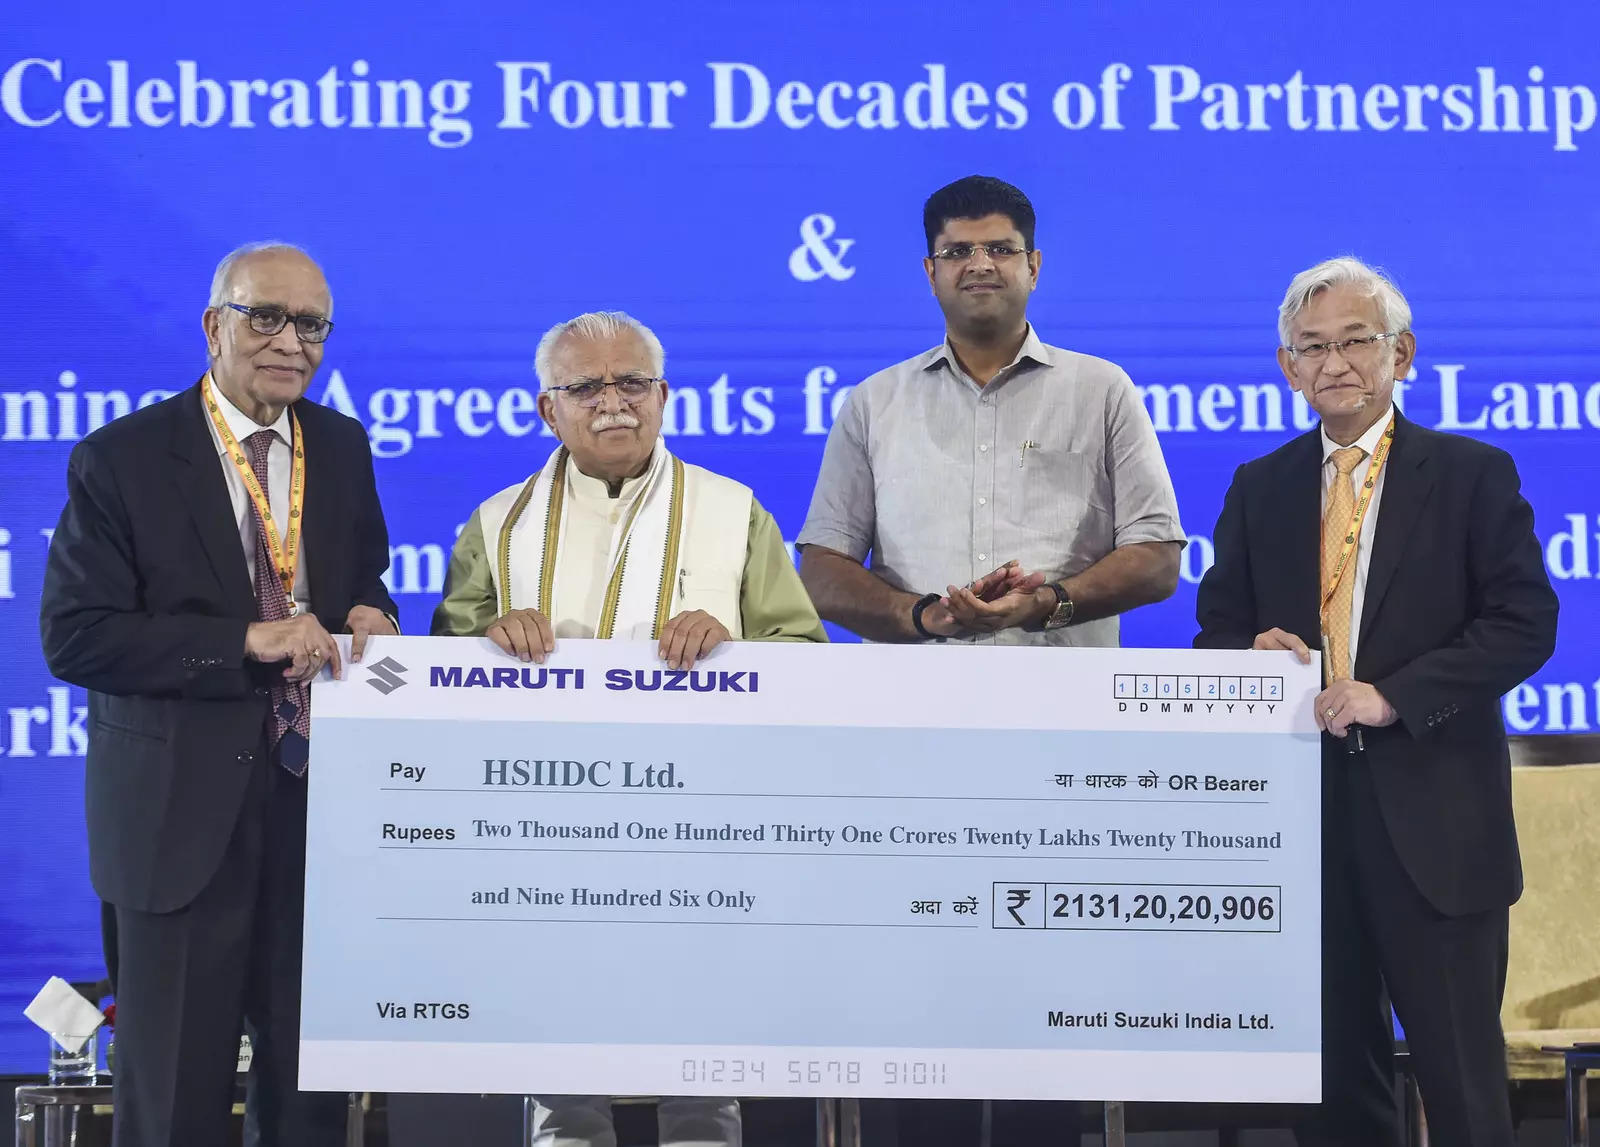 Maruti Suzuki to set up its third manufacturing plant in Haryana with an investment of Rs 18,000 crore